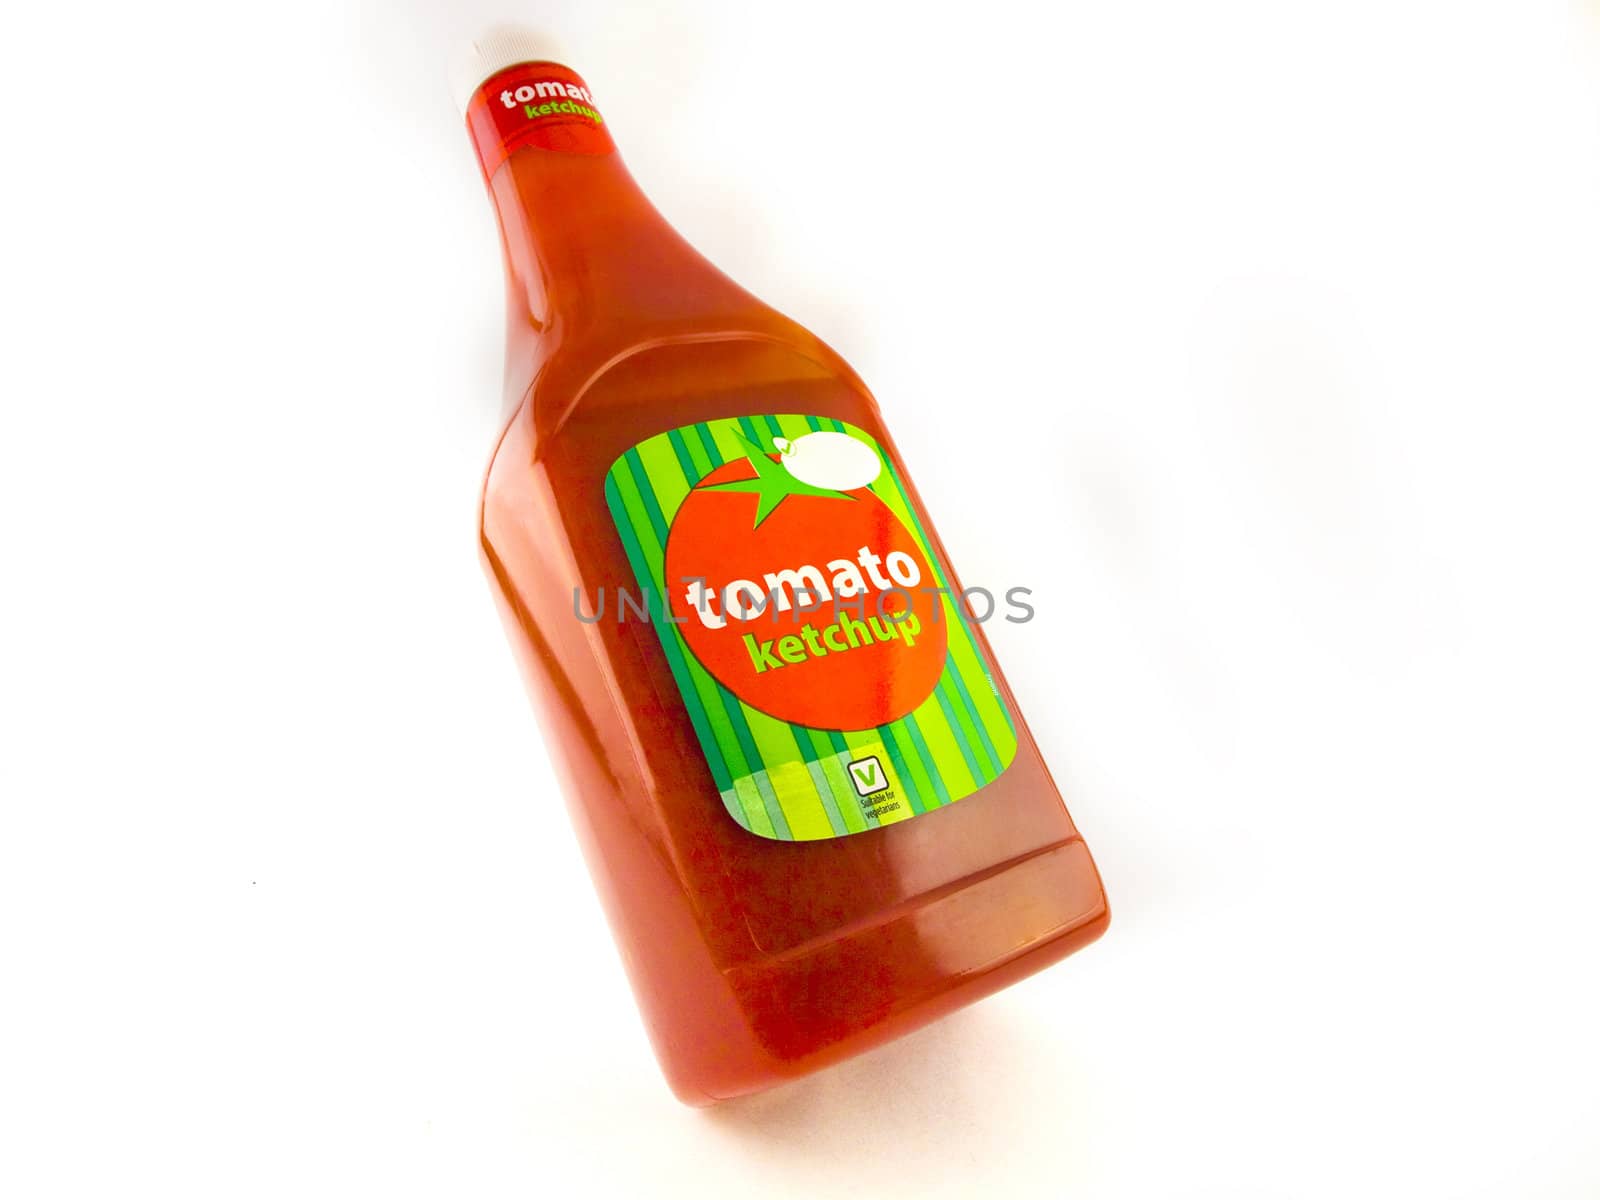 Large Bottle of Tomato Ketchup on White Background by bobbigmac